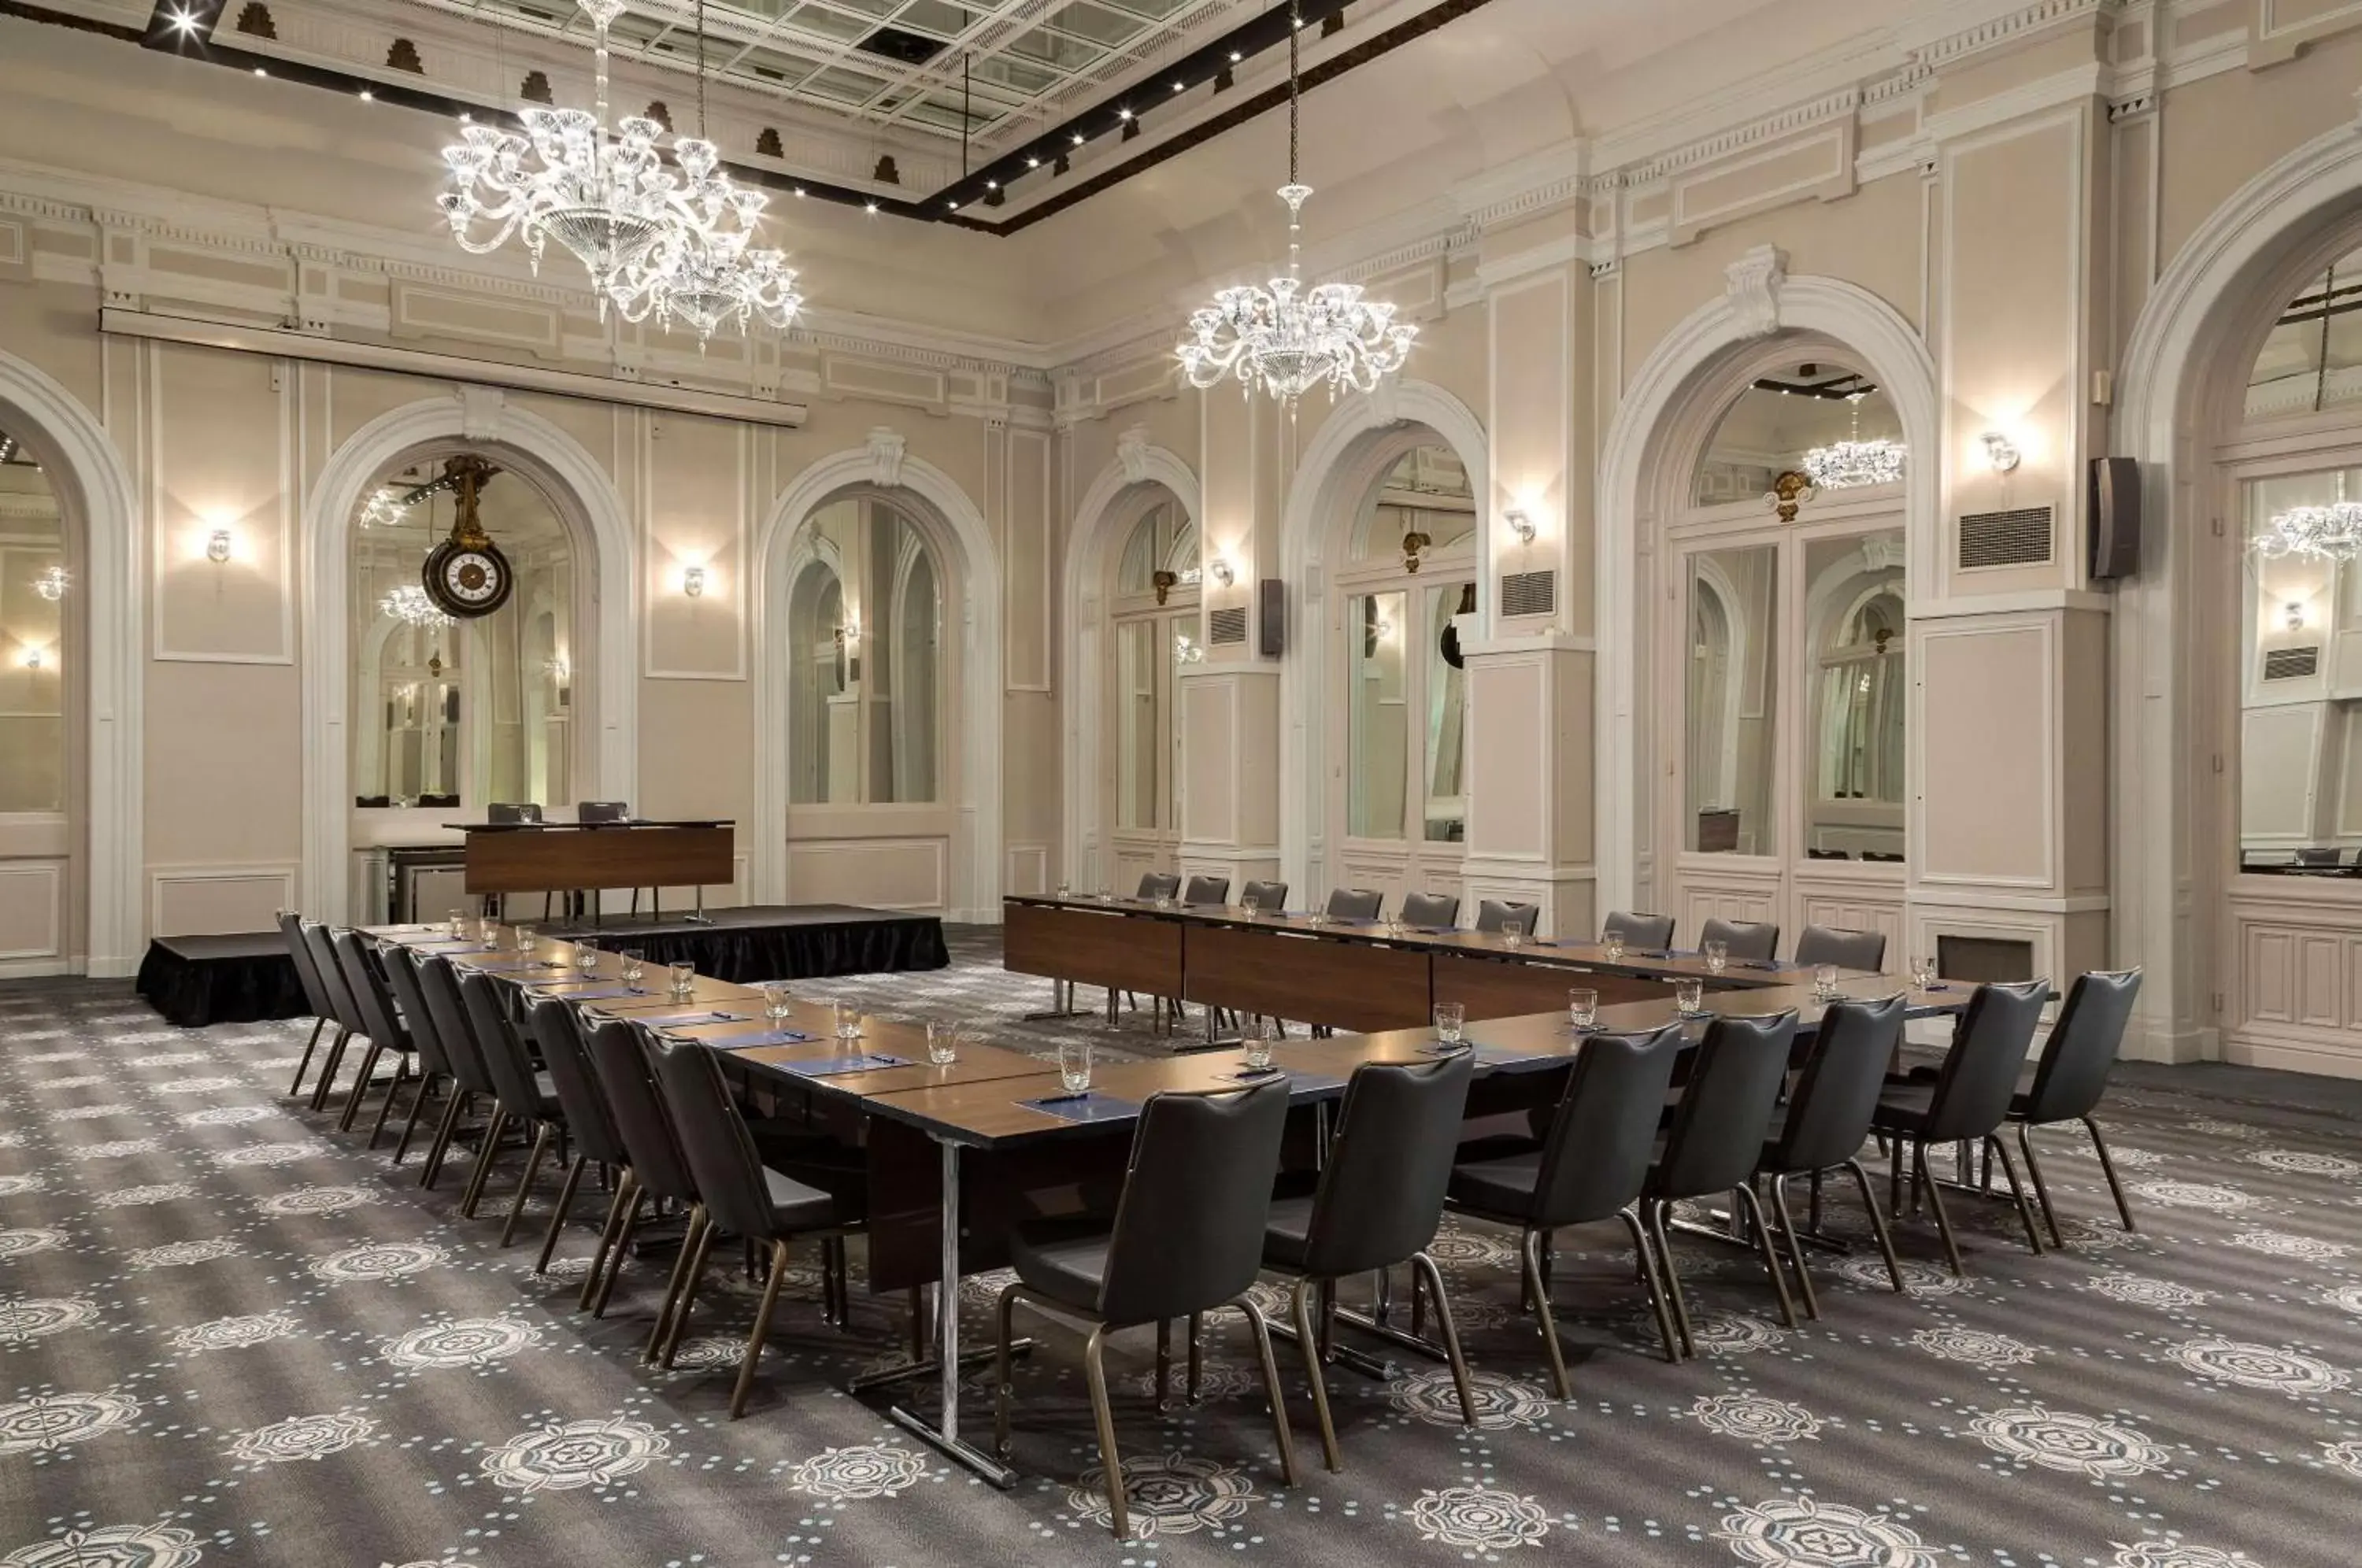 Meeting/conference room in Hilton Paris Opera